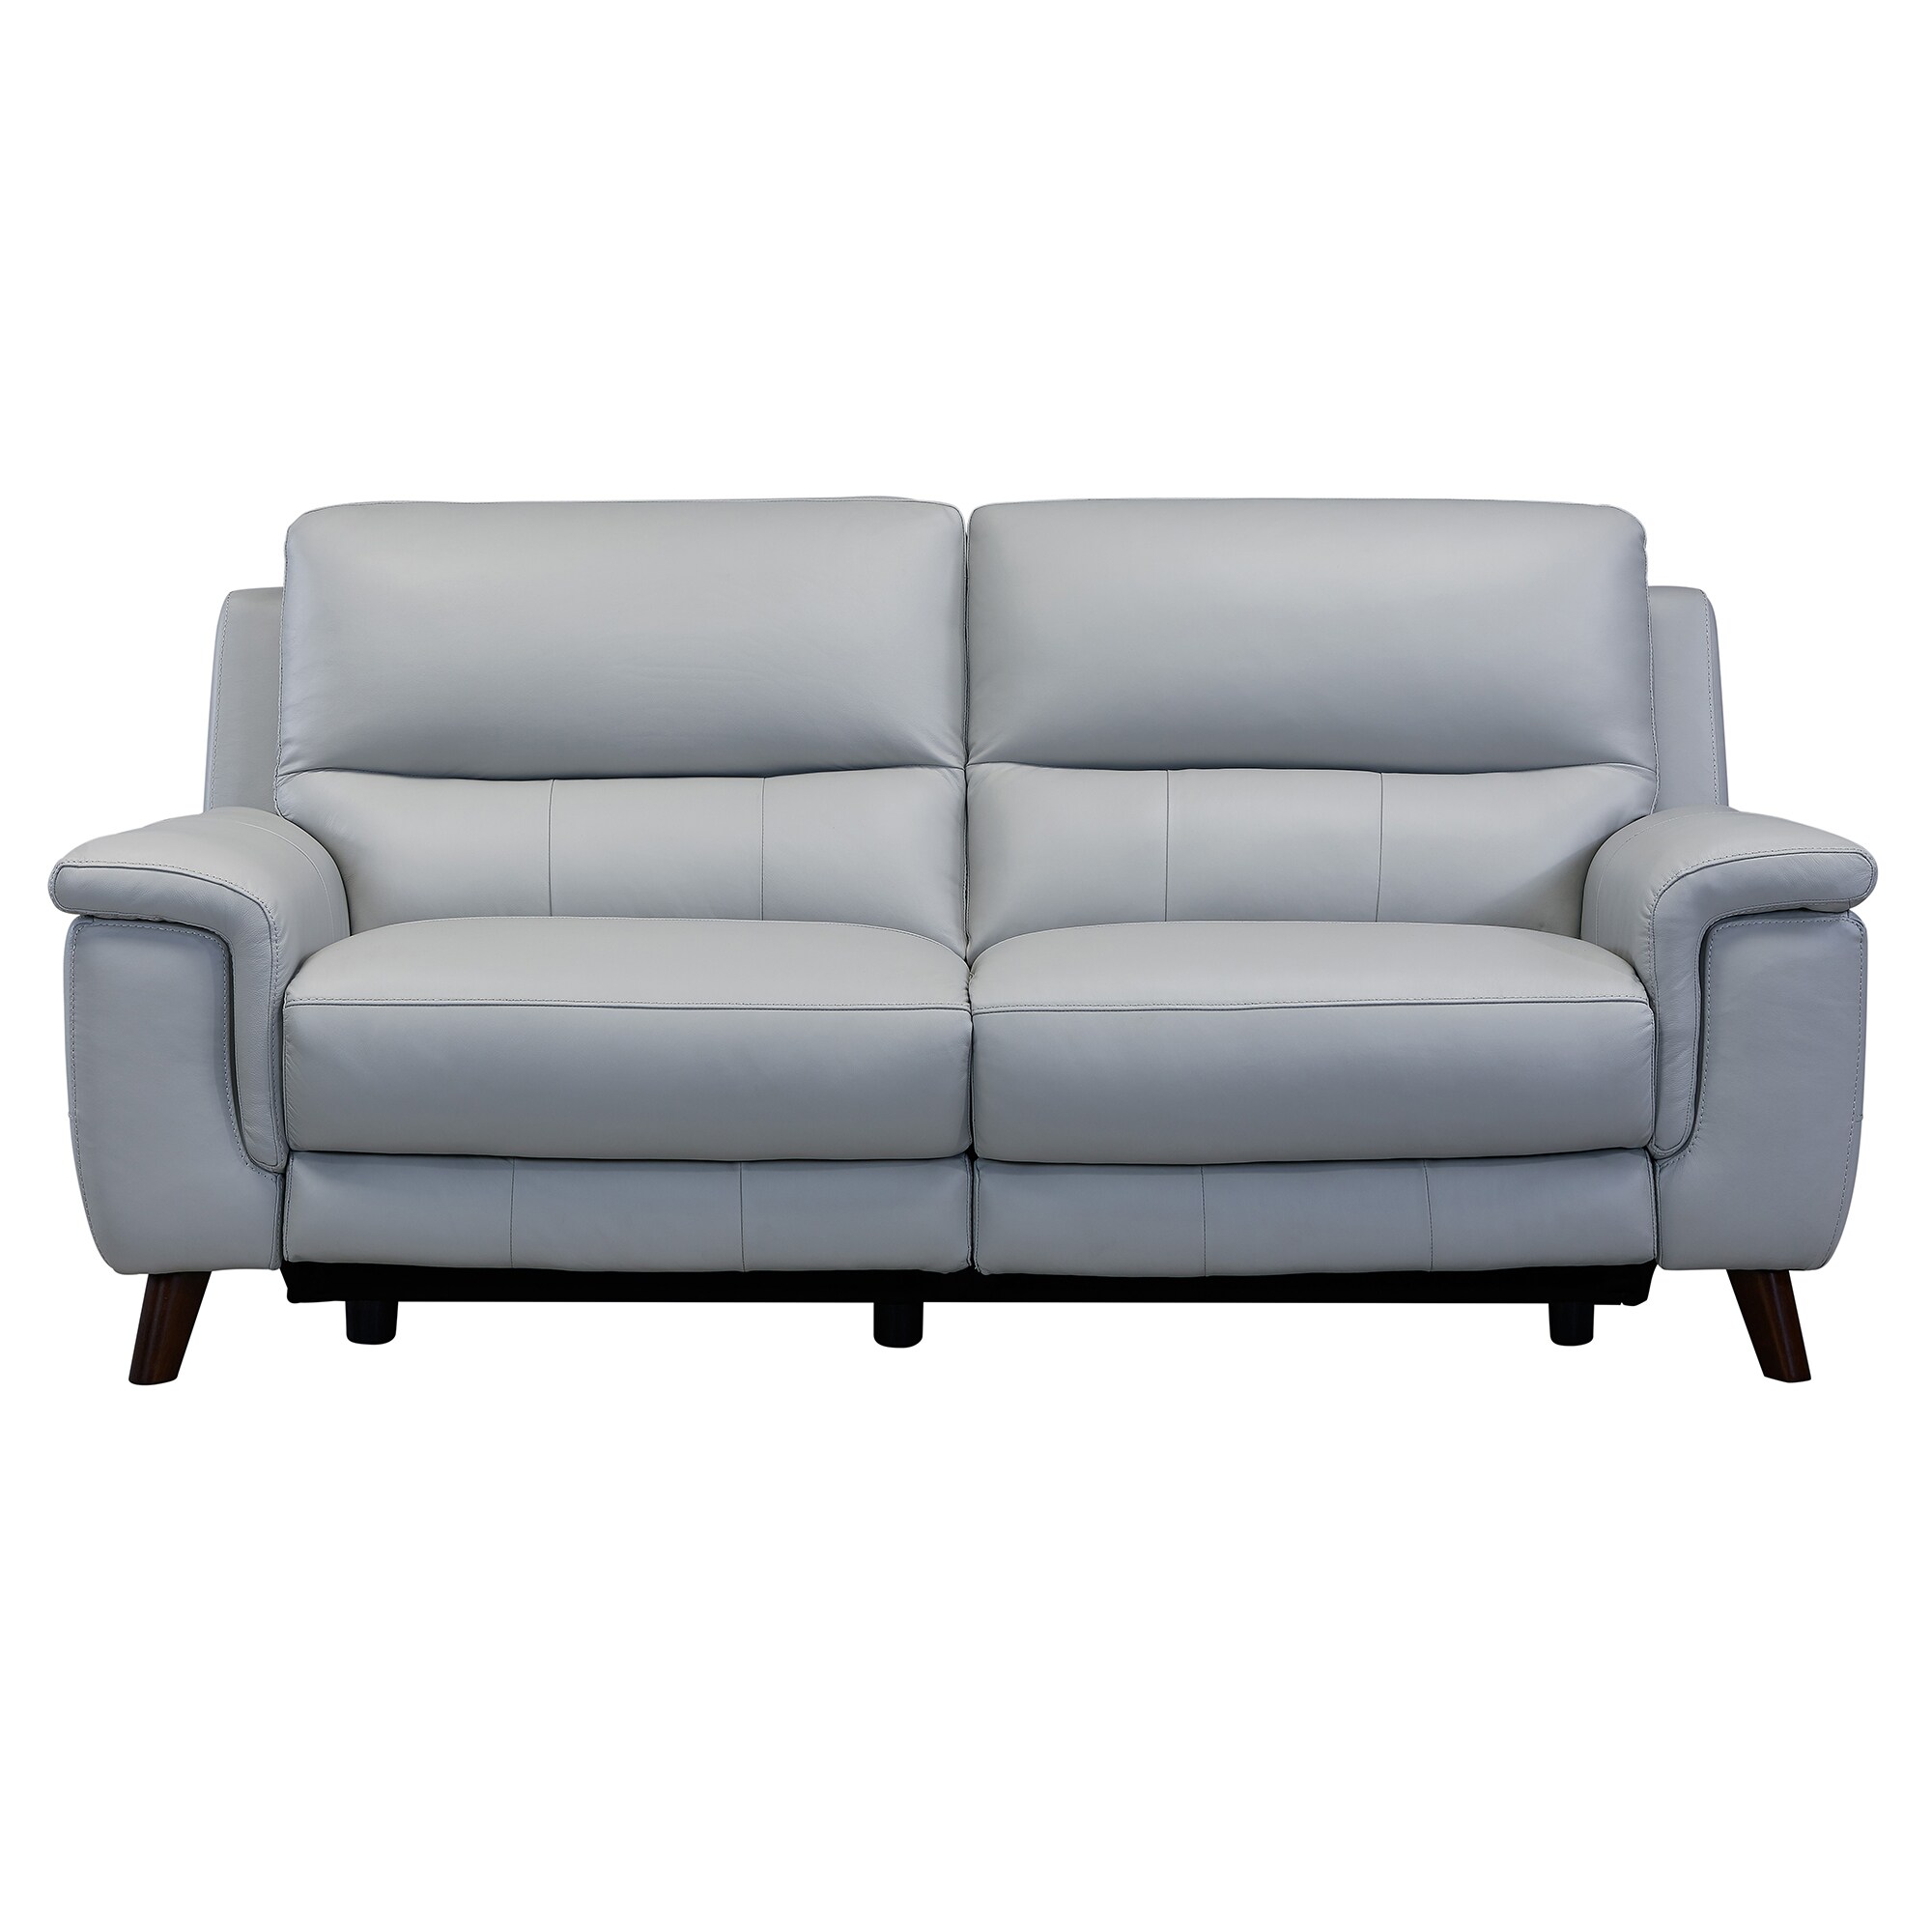 Armen Living Lizette 78 In Modern Dove Grey Genuine Leather 3 Seater Reclining Sofa The Couches Sofas Loveseats Department At Lowes Com